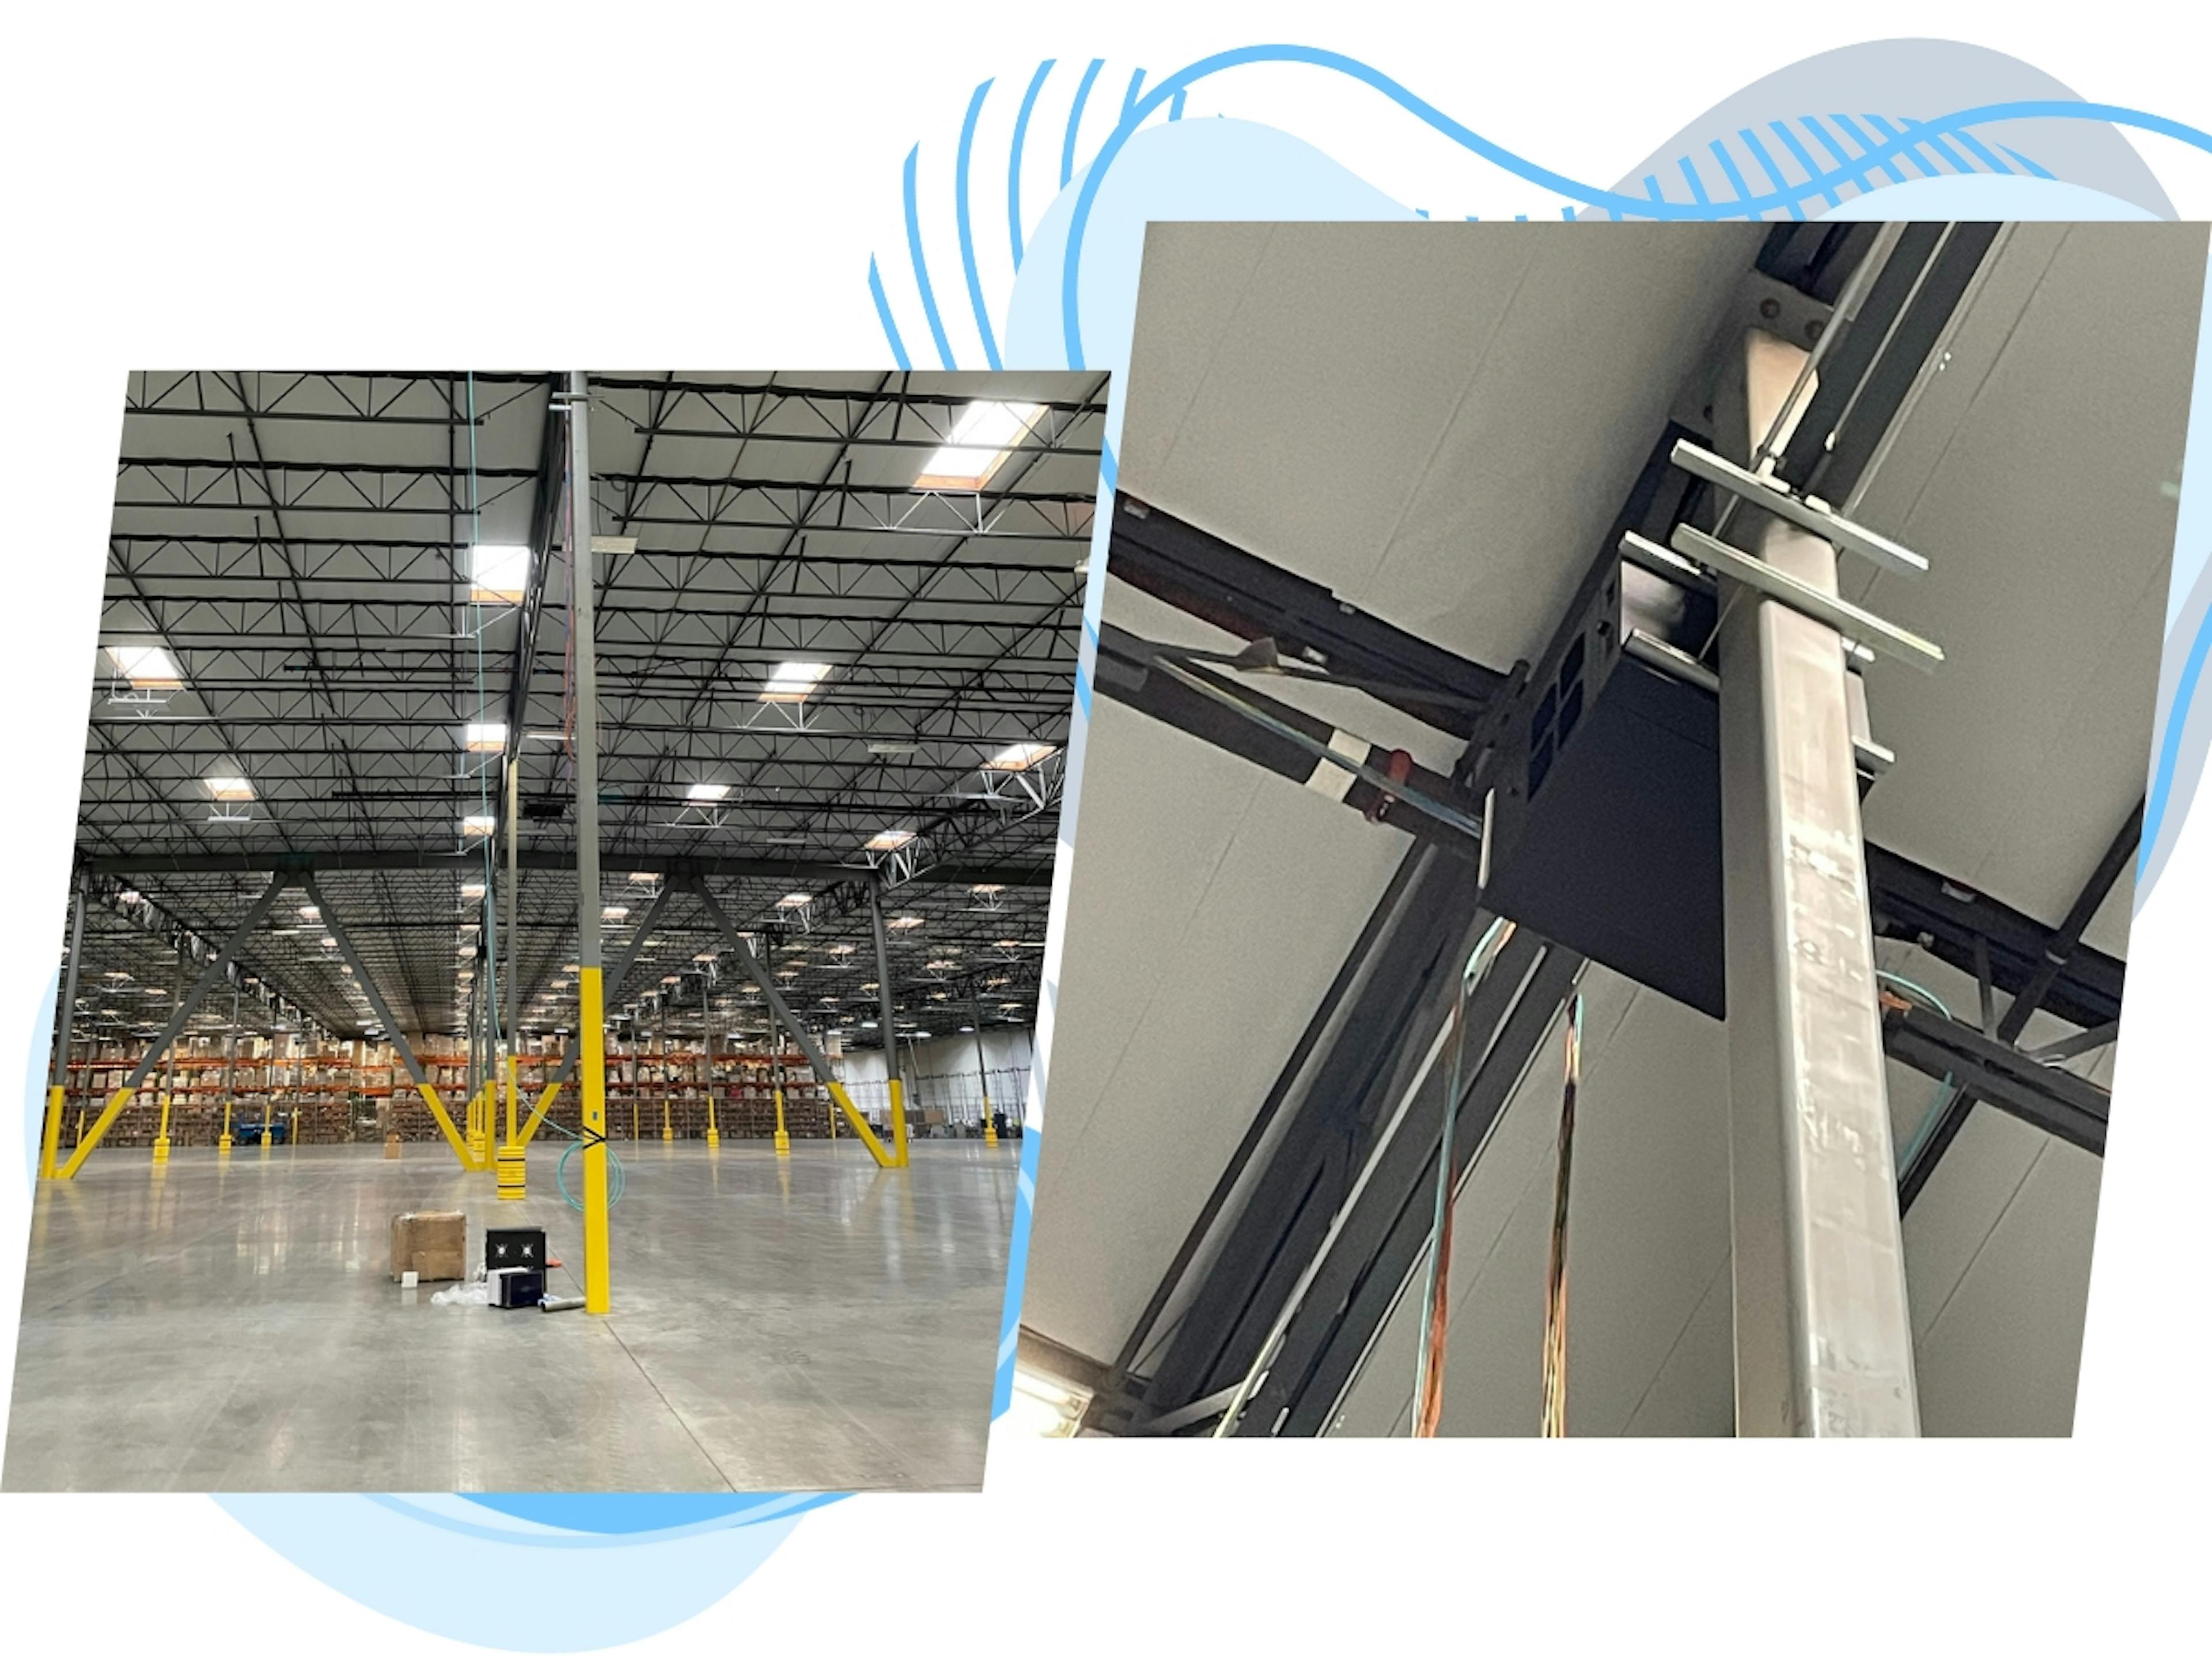 Two examples of warehouse data cabling installed and hung securely.